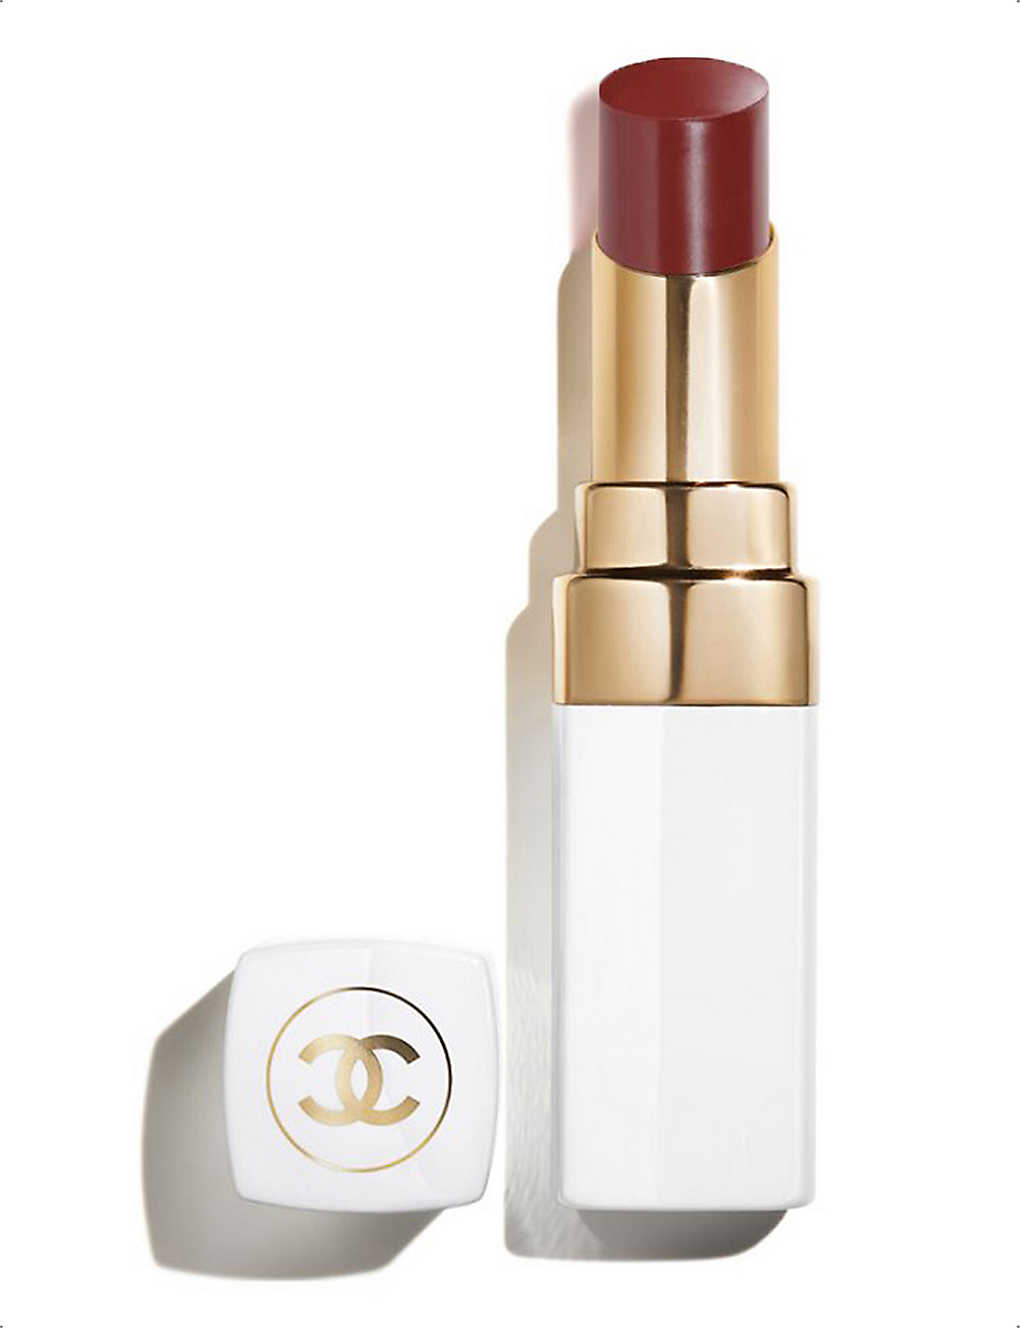 Chanel Fall For Me 924 Rouge Coco Baume Hydrating Tinted Lip Balm 3g